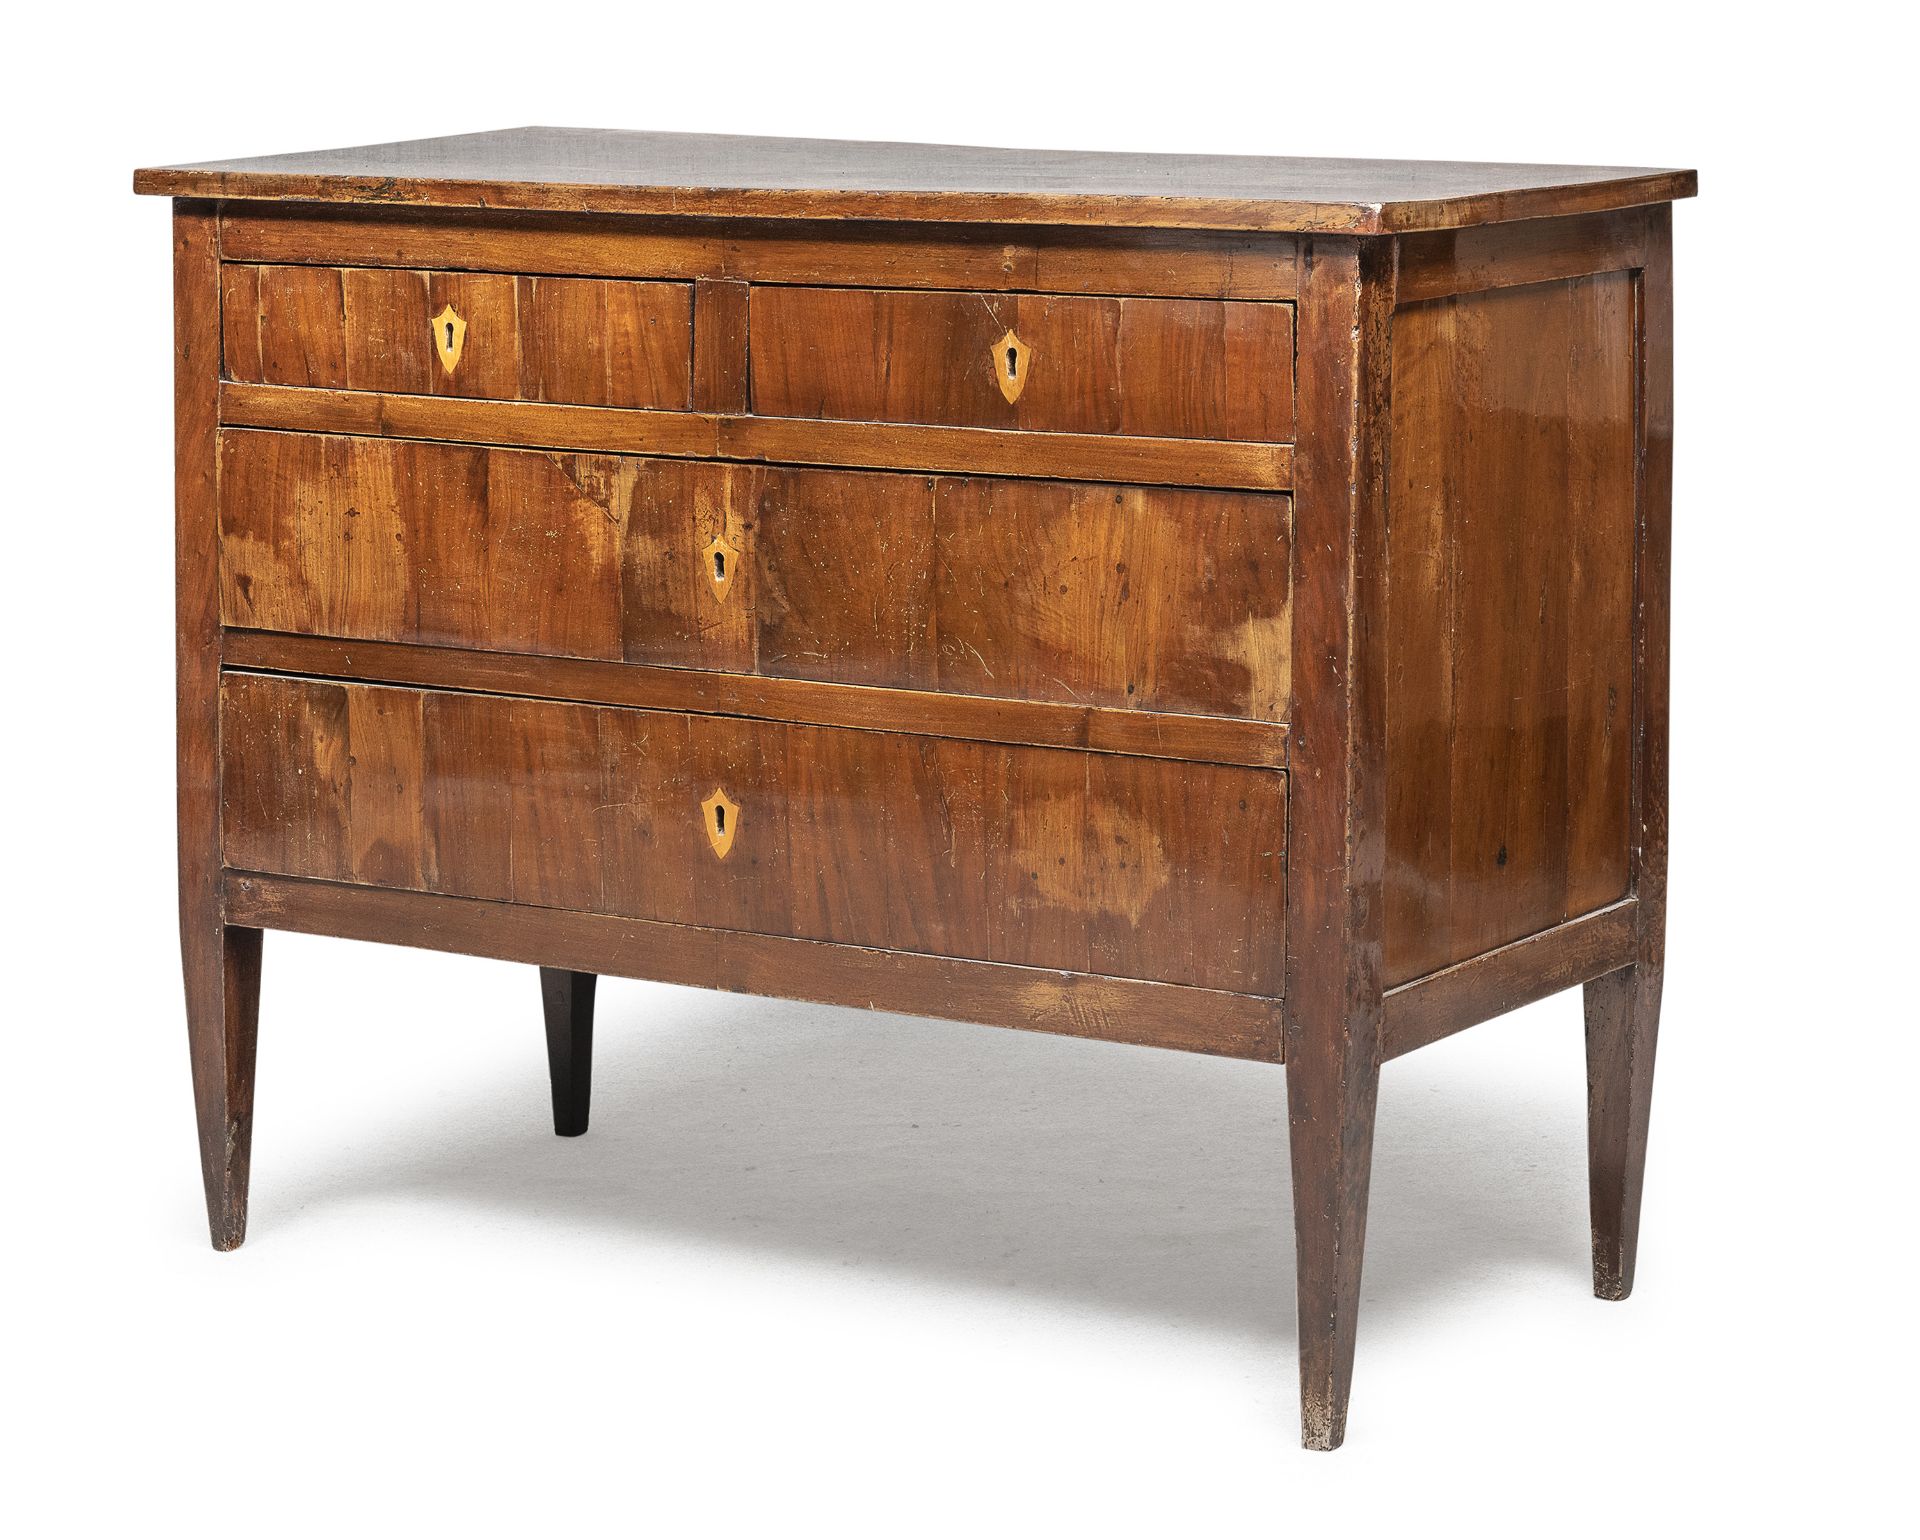 WALNUT COMMODE CENTRAL ITALY END OF THE 18TH CENTURY